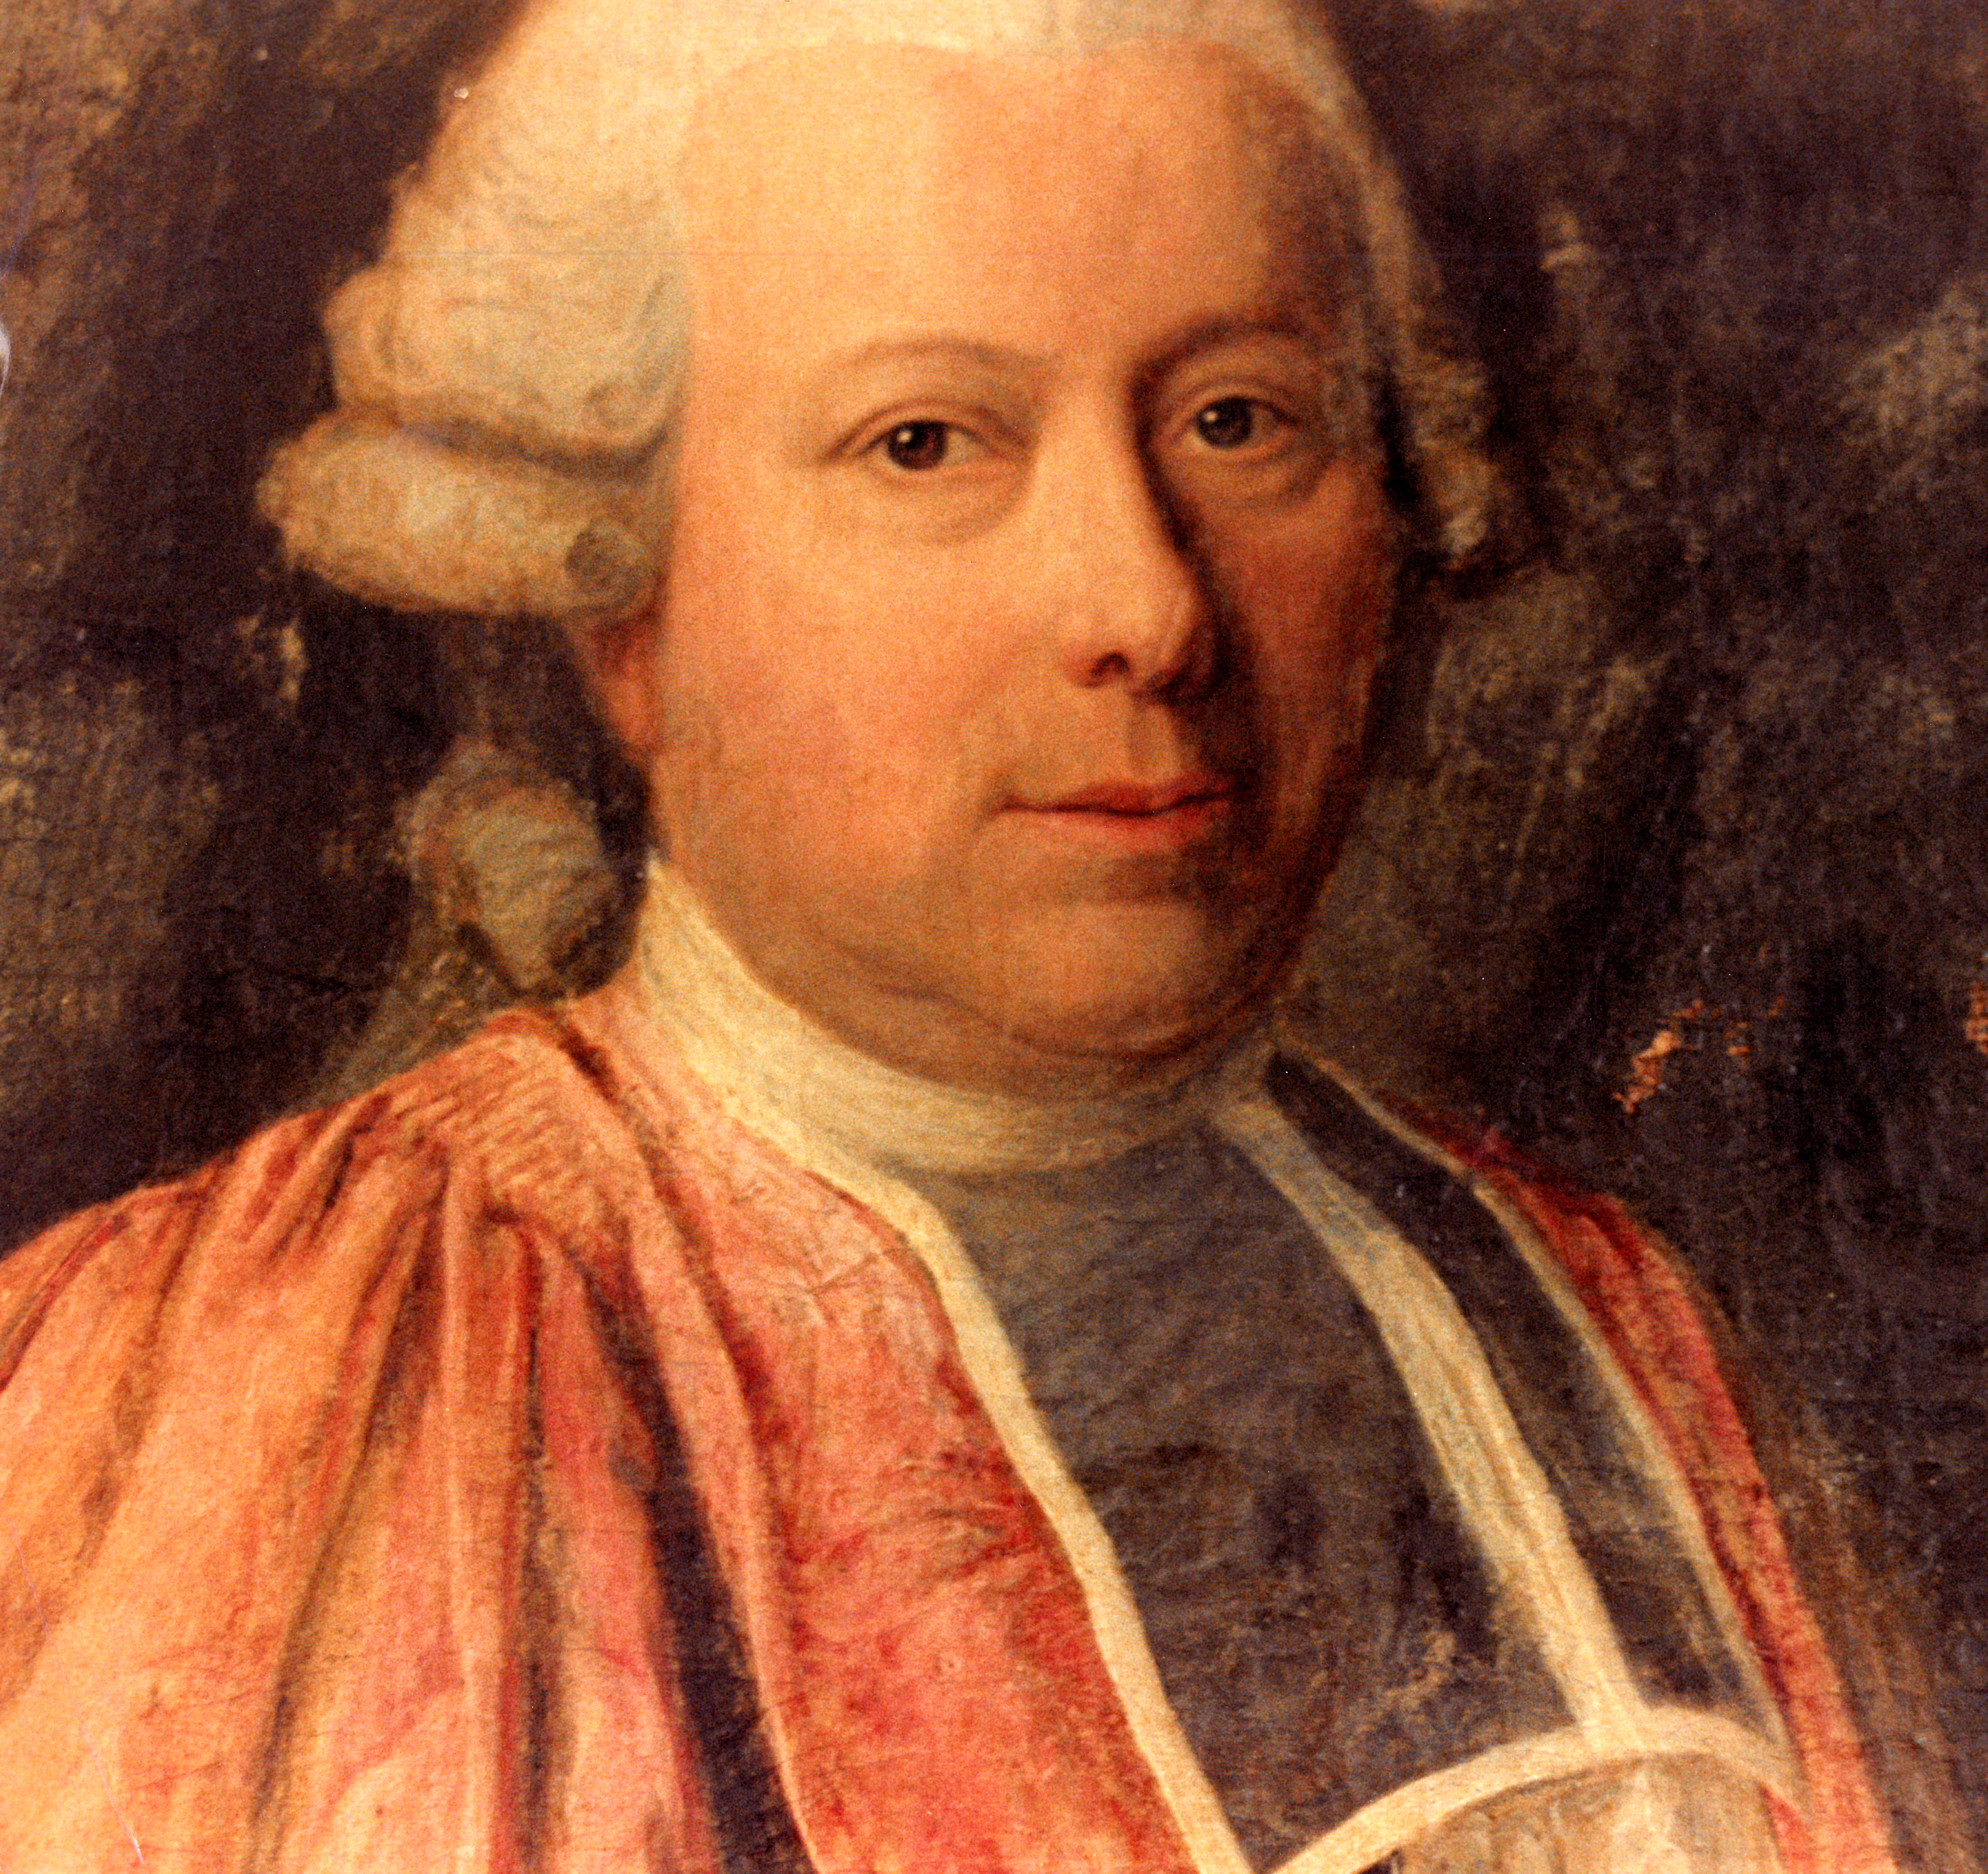 Guillaume Brochon (1729-1814), dressed in red gown as Jurat-Avocat (deputy-mayor lawyer) because elected at the Bordeaux Town council from 1784 till 1786